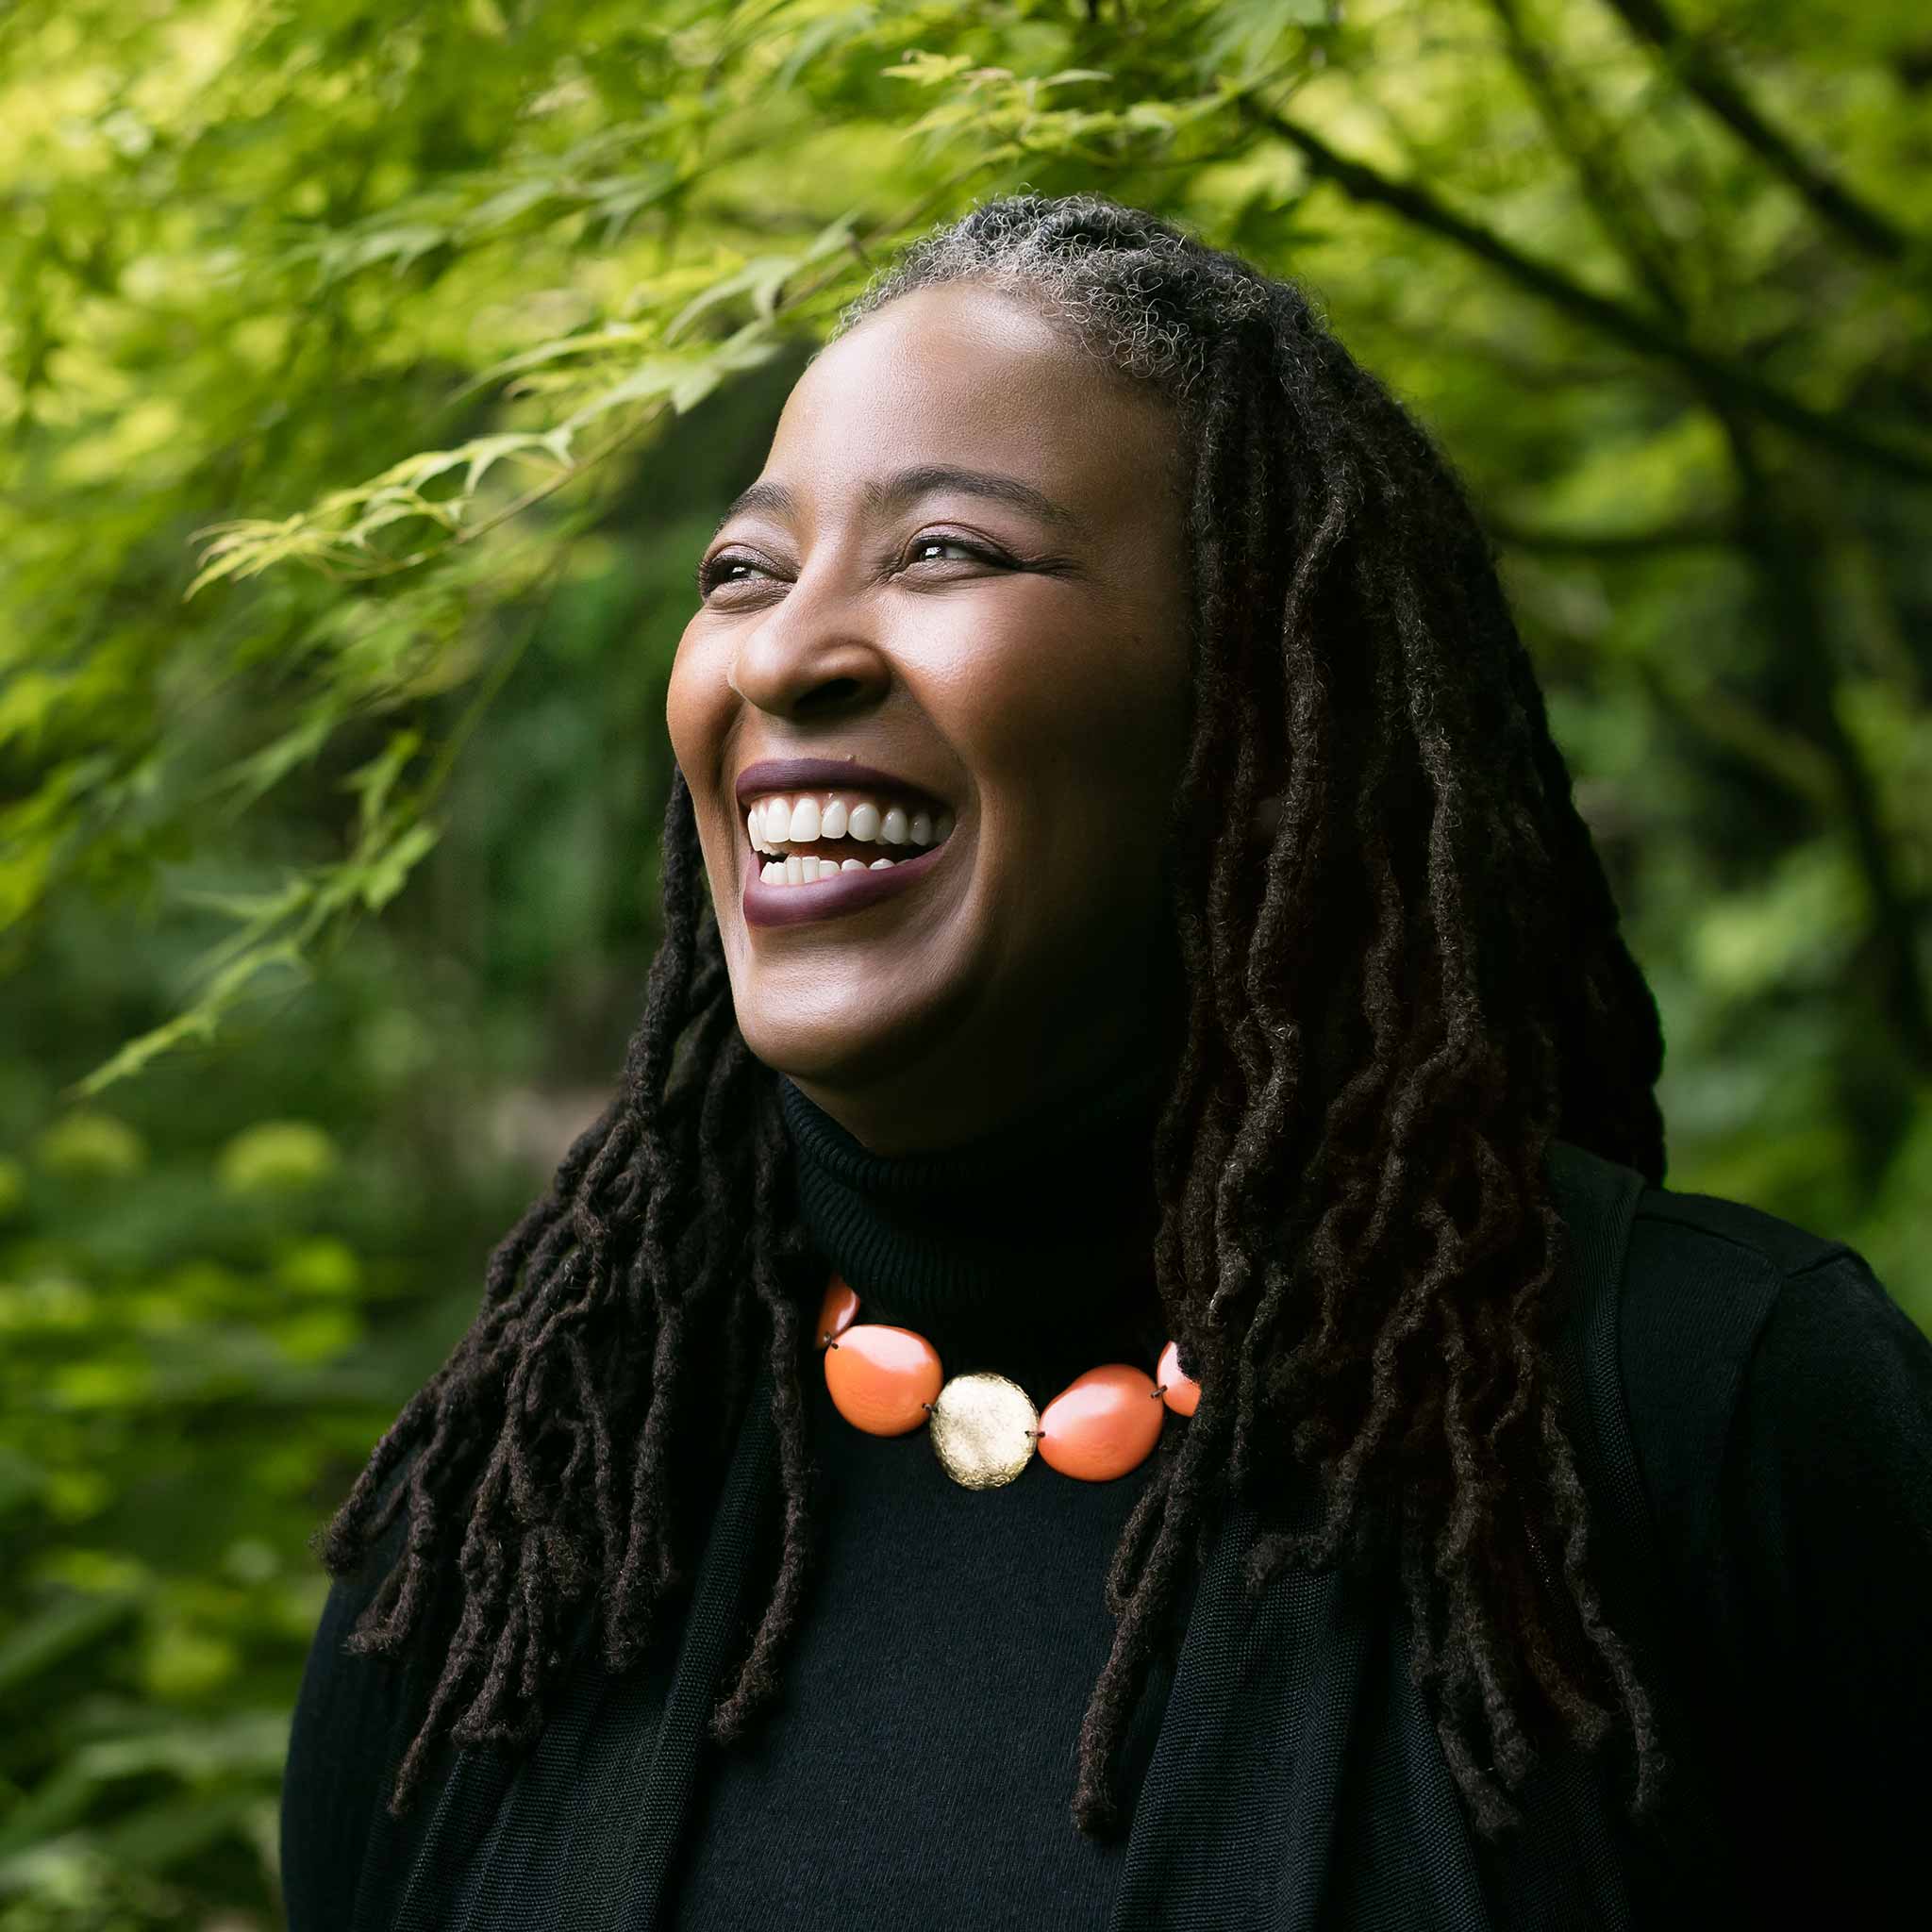 Poet Camille Dungy, a Black woman with long dreadlocks wearing a black turtleneck and a bold orange and gold necklace, laughing and standing among trees